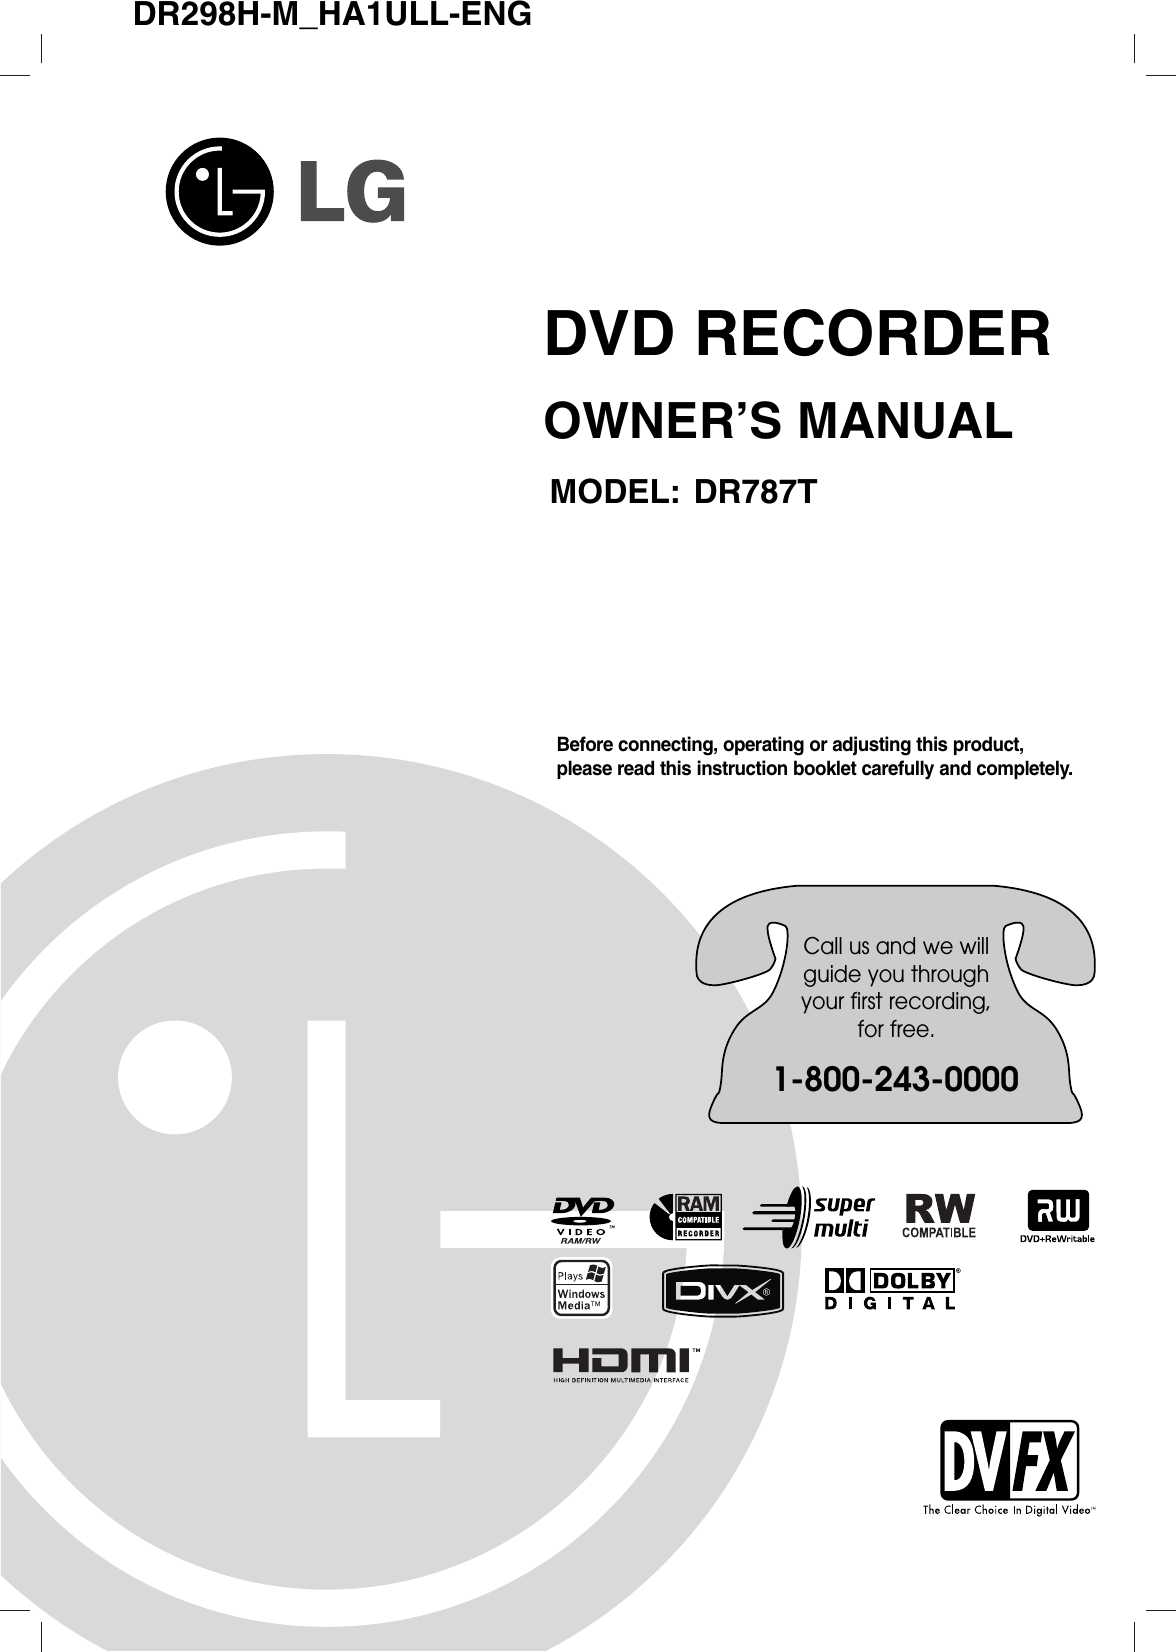 DR298H-M_HA1ULL-ENGDVD RECORDEROWNER’S MANUALMODEL: DR787TBefore connecting, operating or adjusting this product,please read this instruction booklet carefully and completely.Call us and we willguide you throughyour first recording,for free.1-800-243-0000